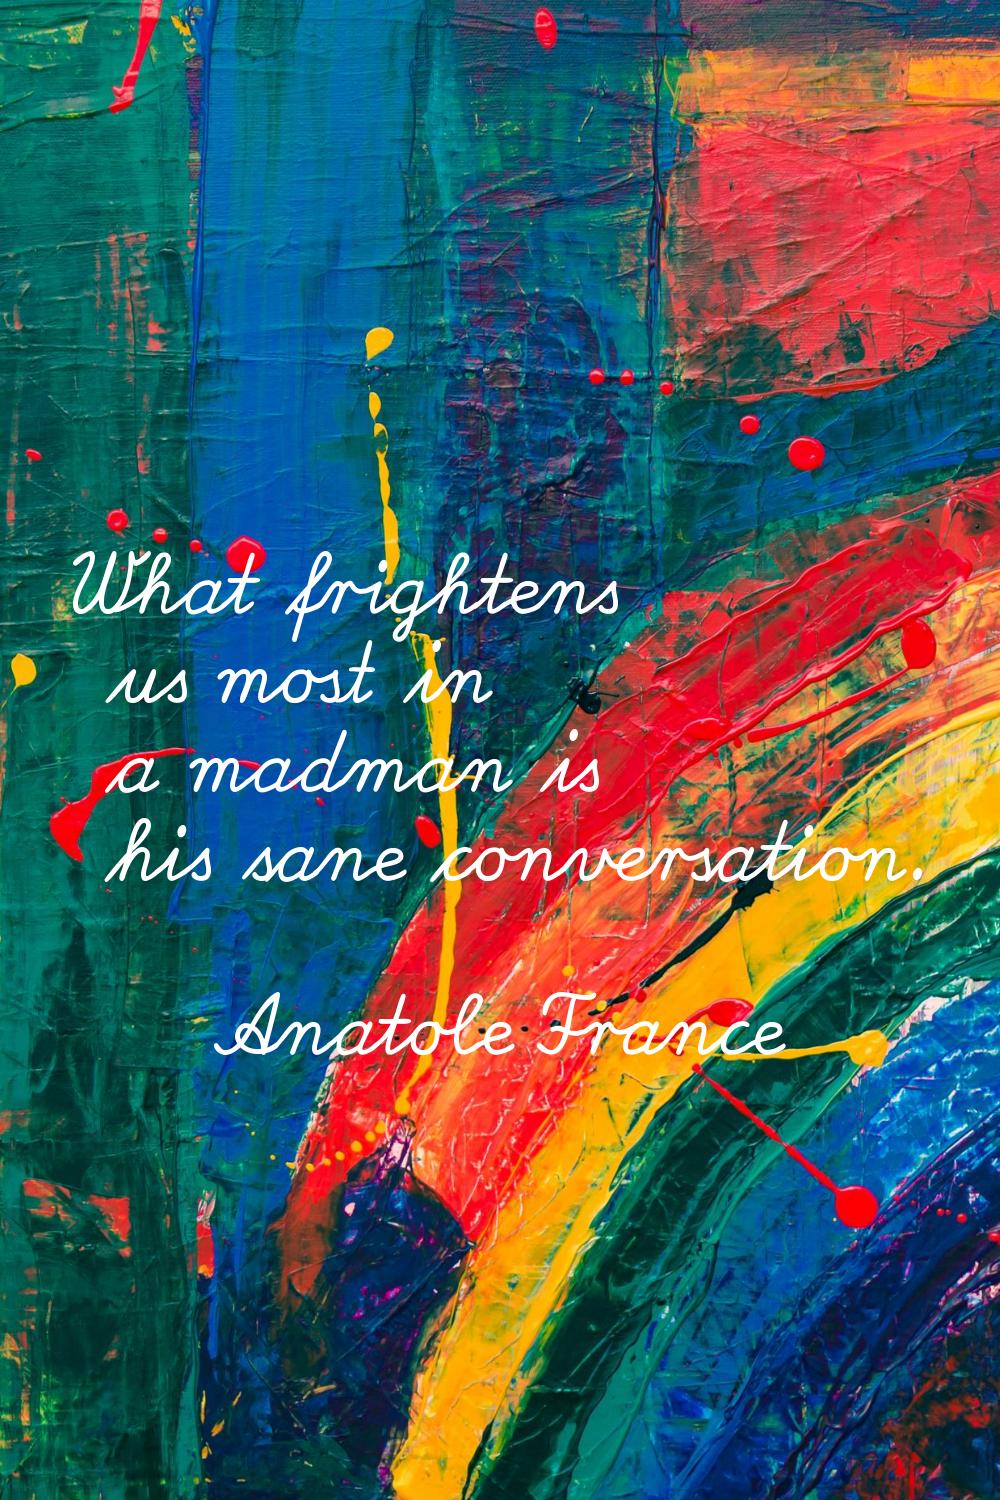 What frightens us most in a madman is his sane conversation.